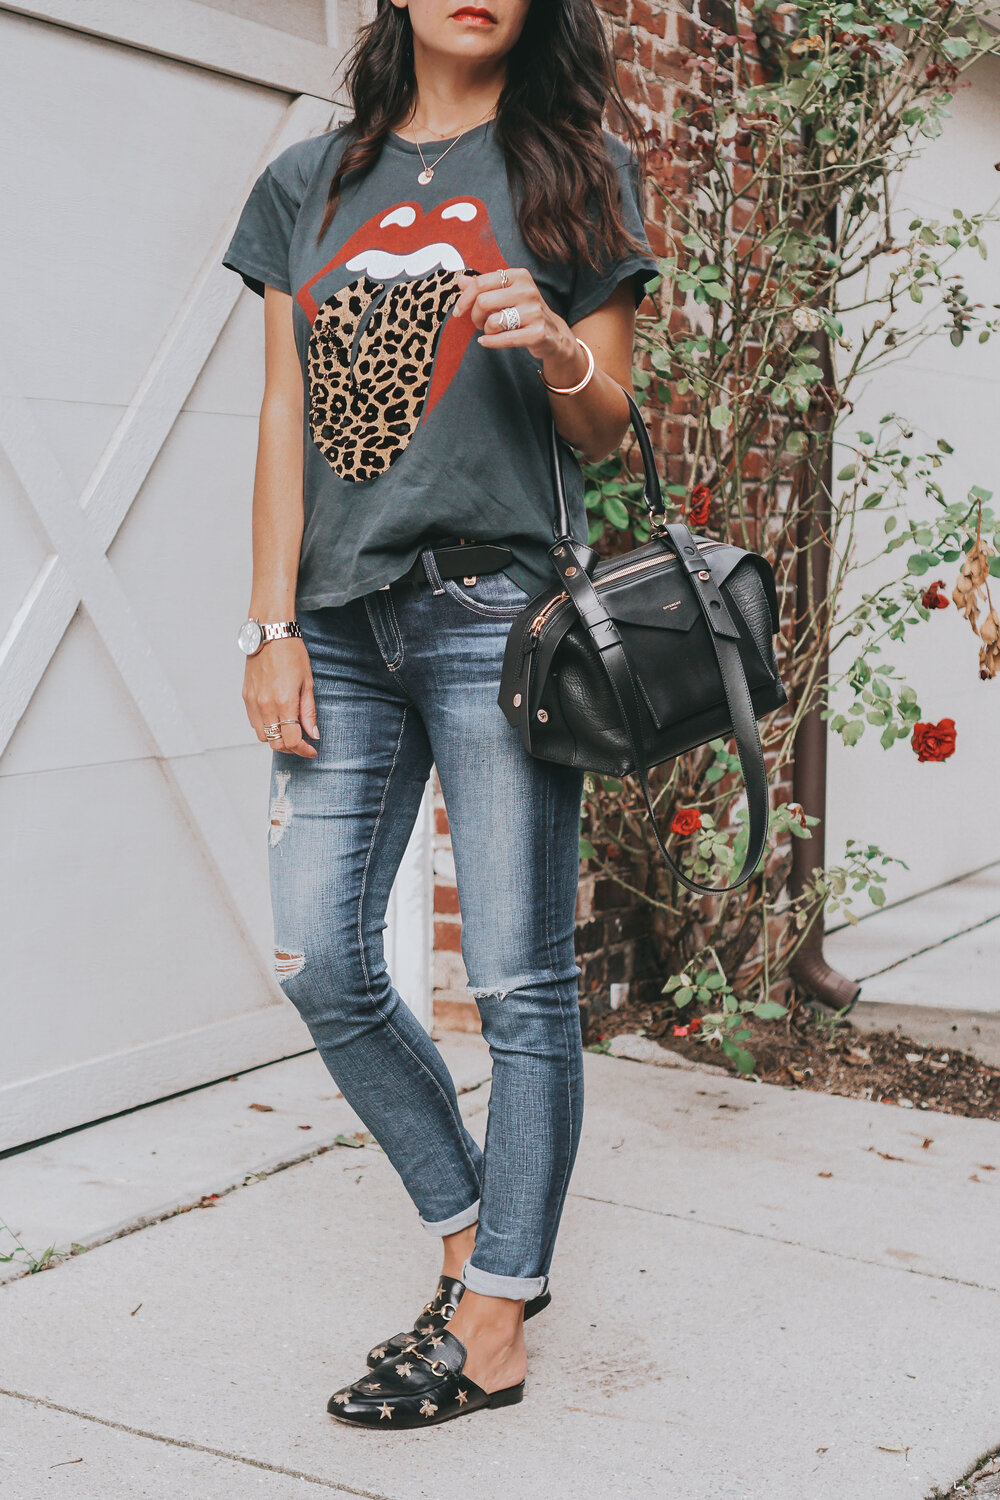 Rolling Stones Tee, How to Style A Band Tee, Gucci Mules